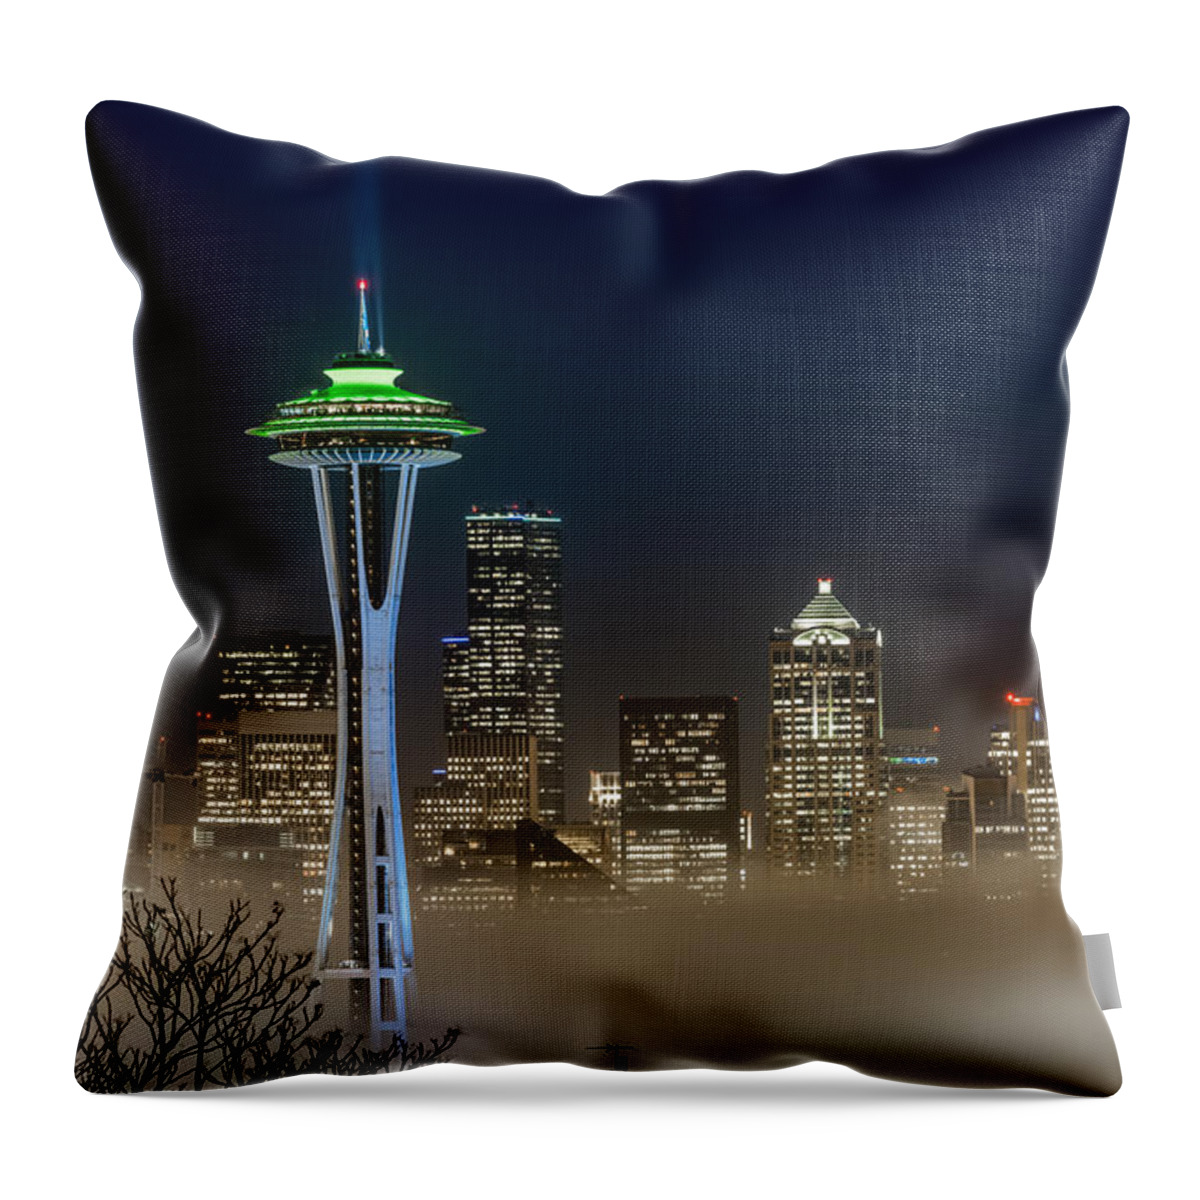 City Throw Pillow featuring the photograph Seattle Foggy Night Lights by Ken Stanback